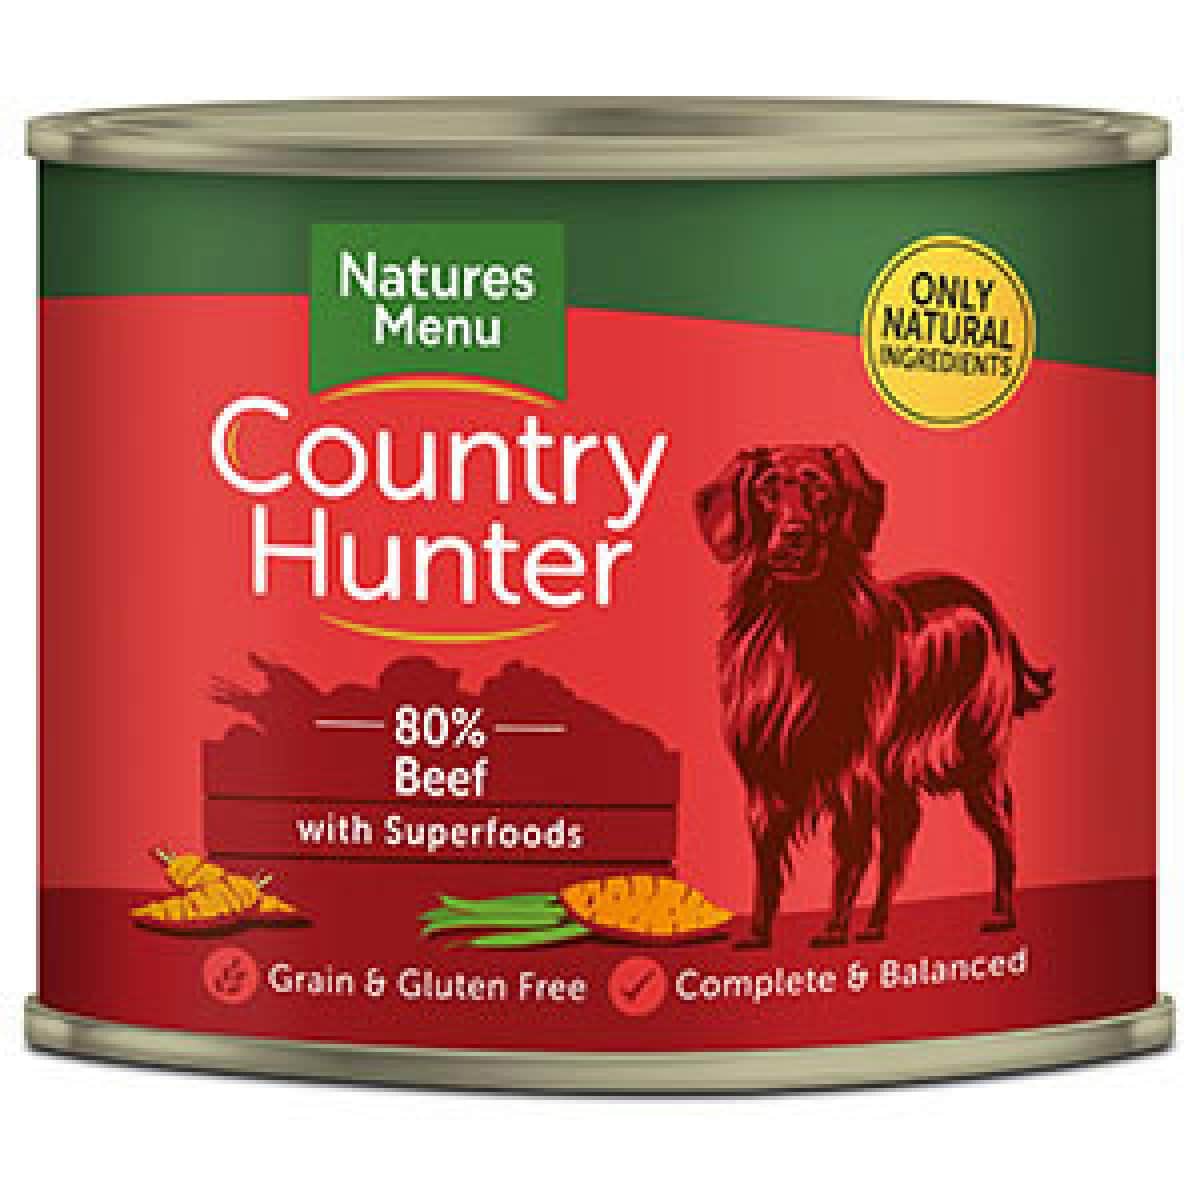 Country Hunter 80% Beef 600g Main Image